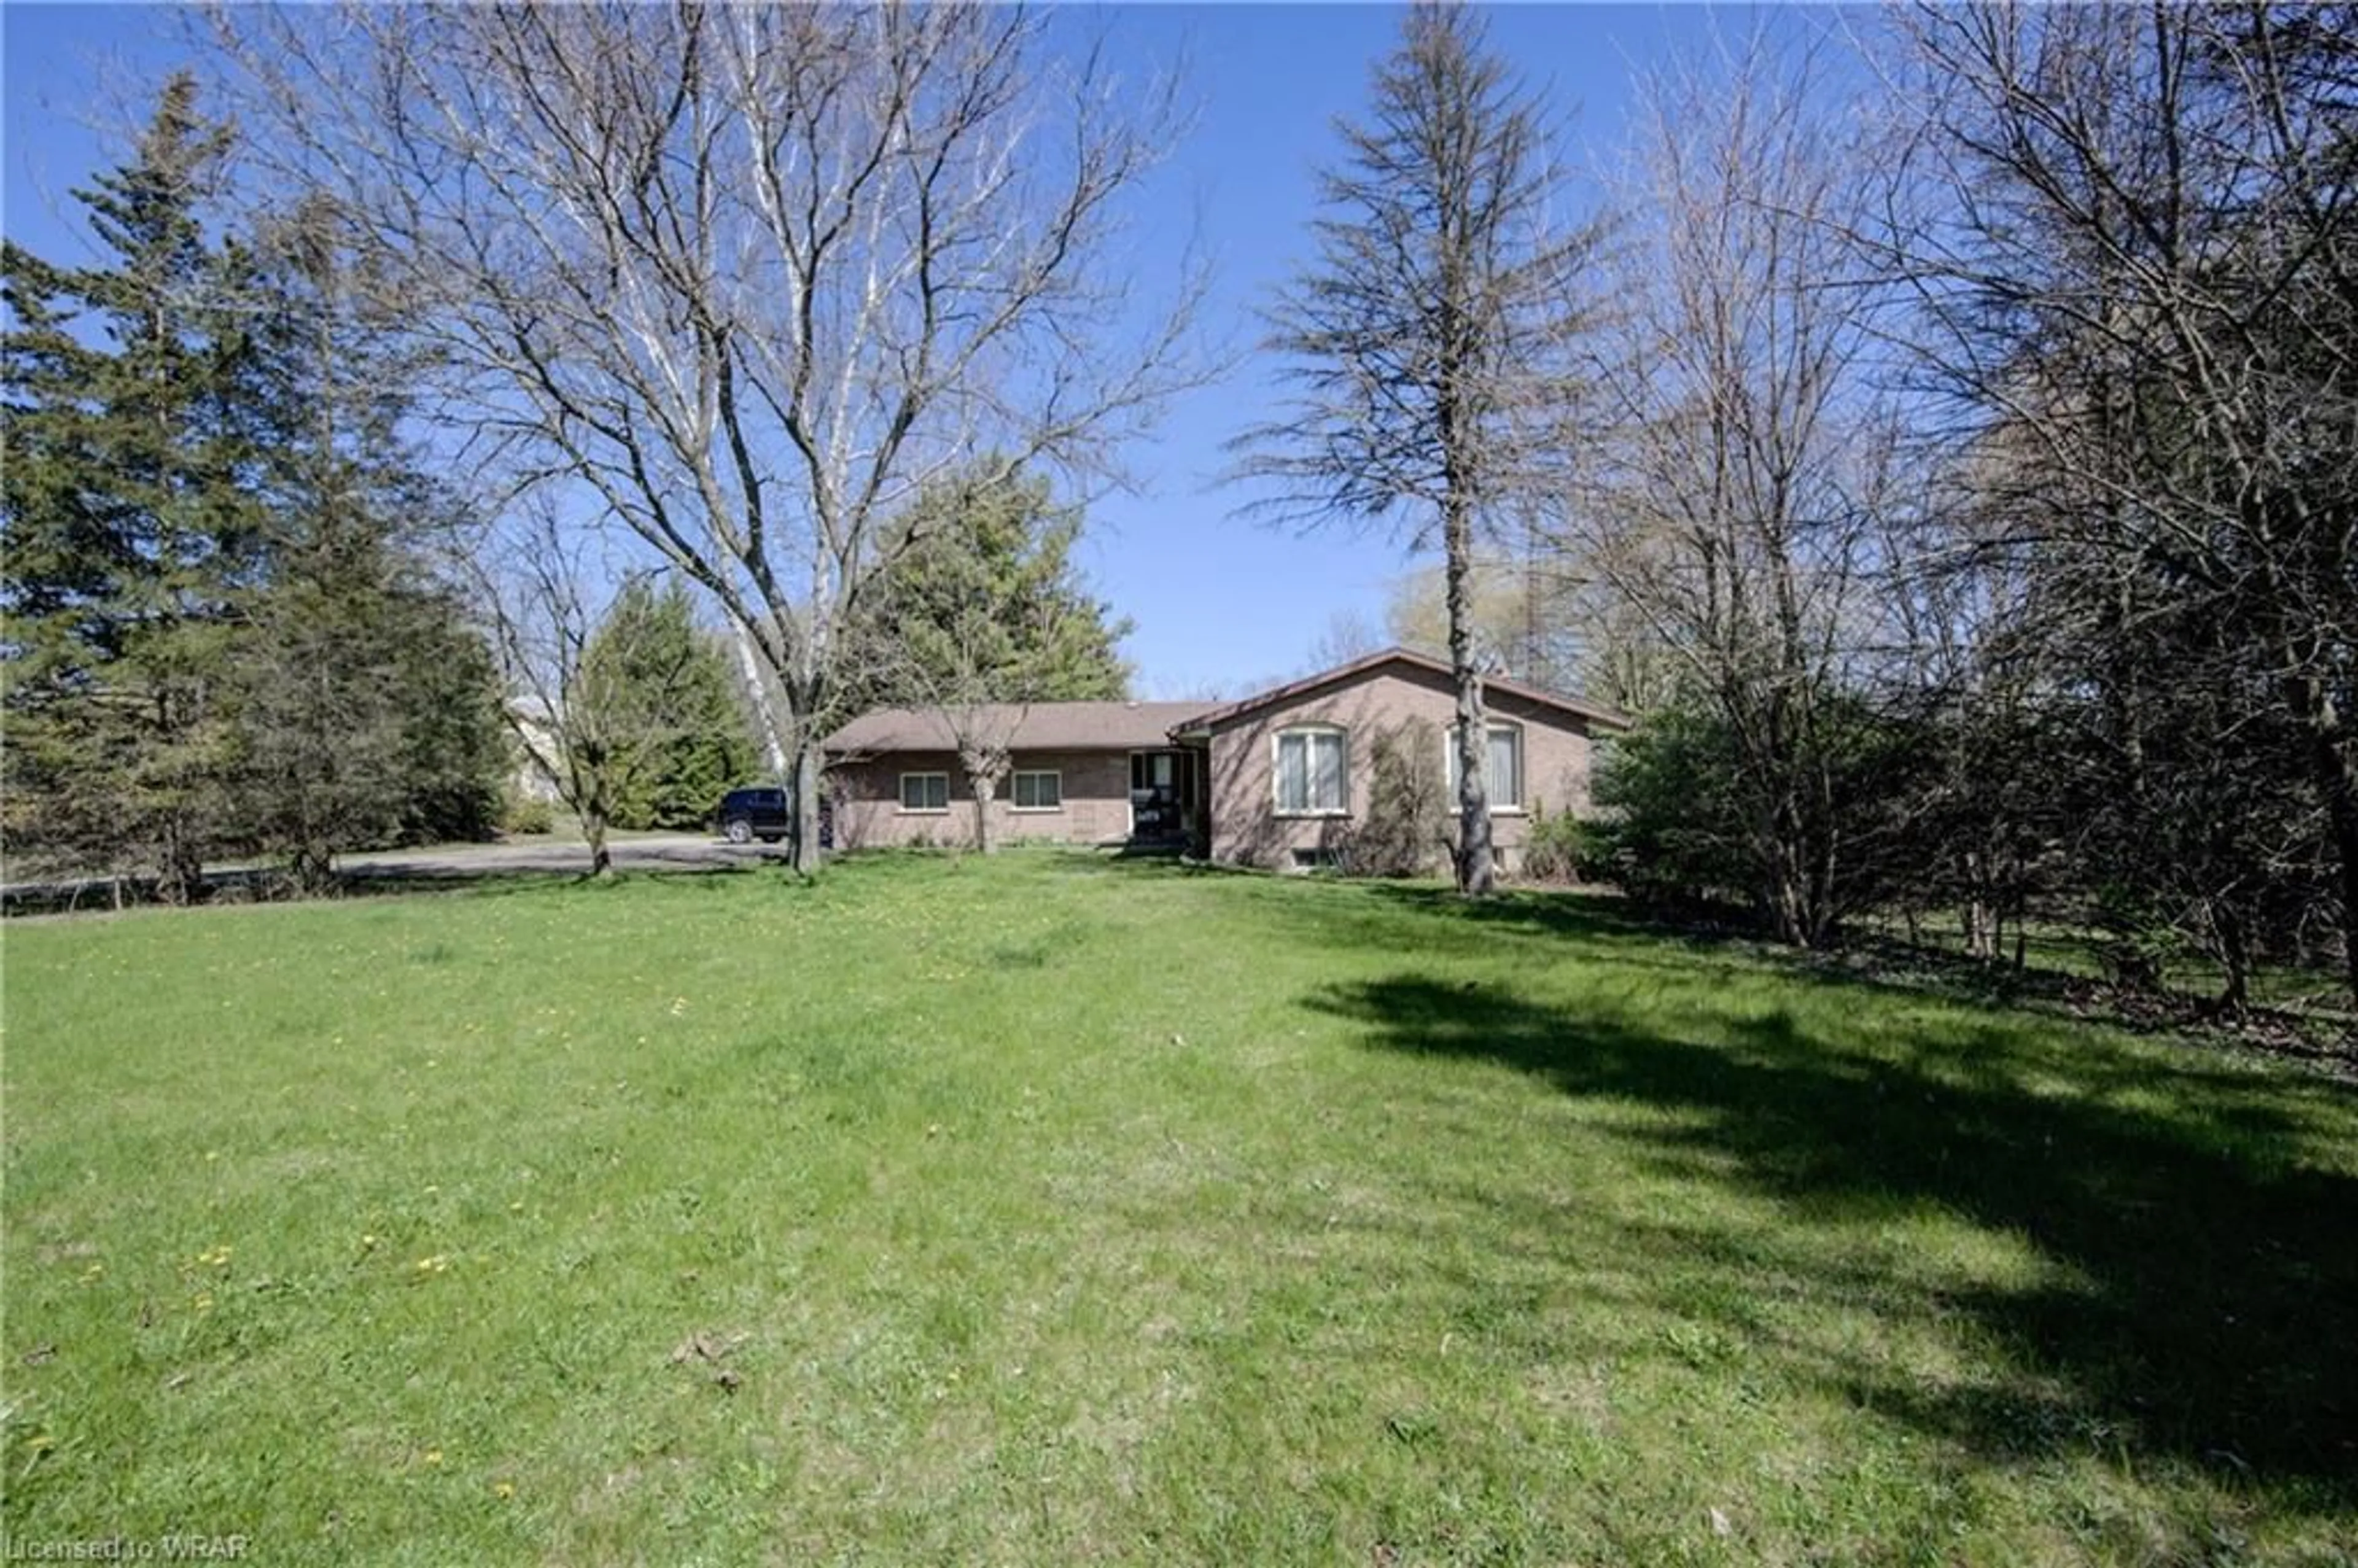 Cottage for 345 Governors Rd, Paris Ontario N3L 3E1